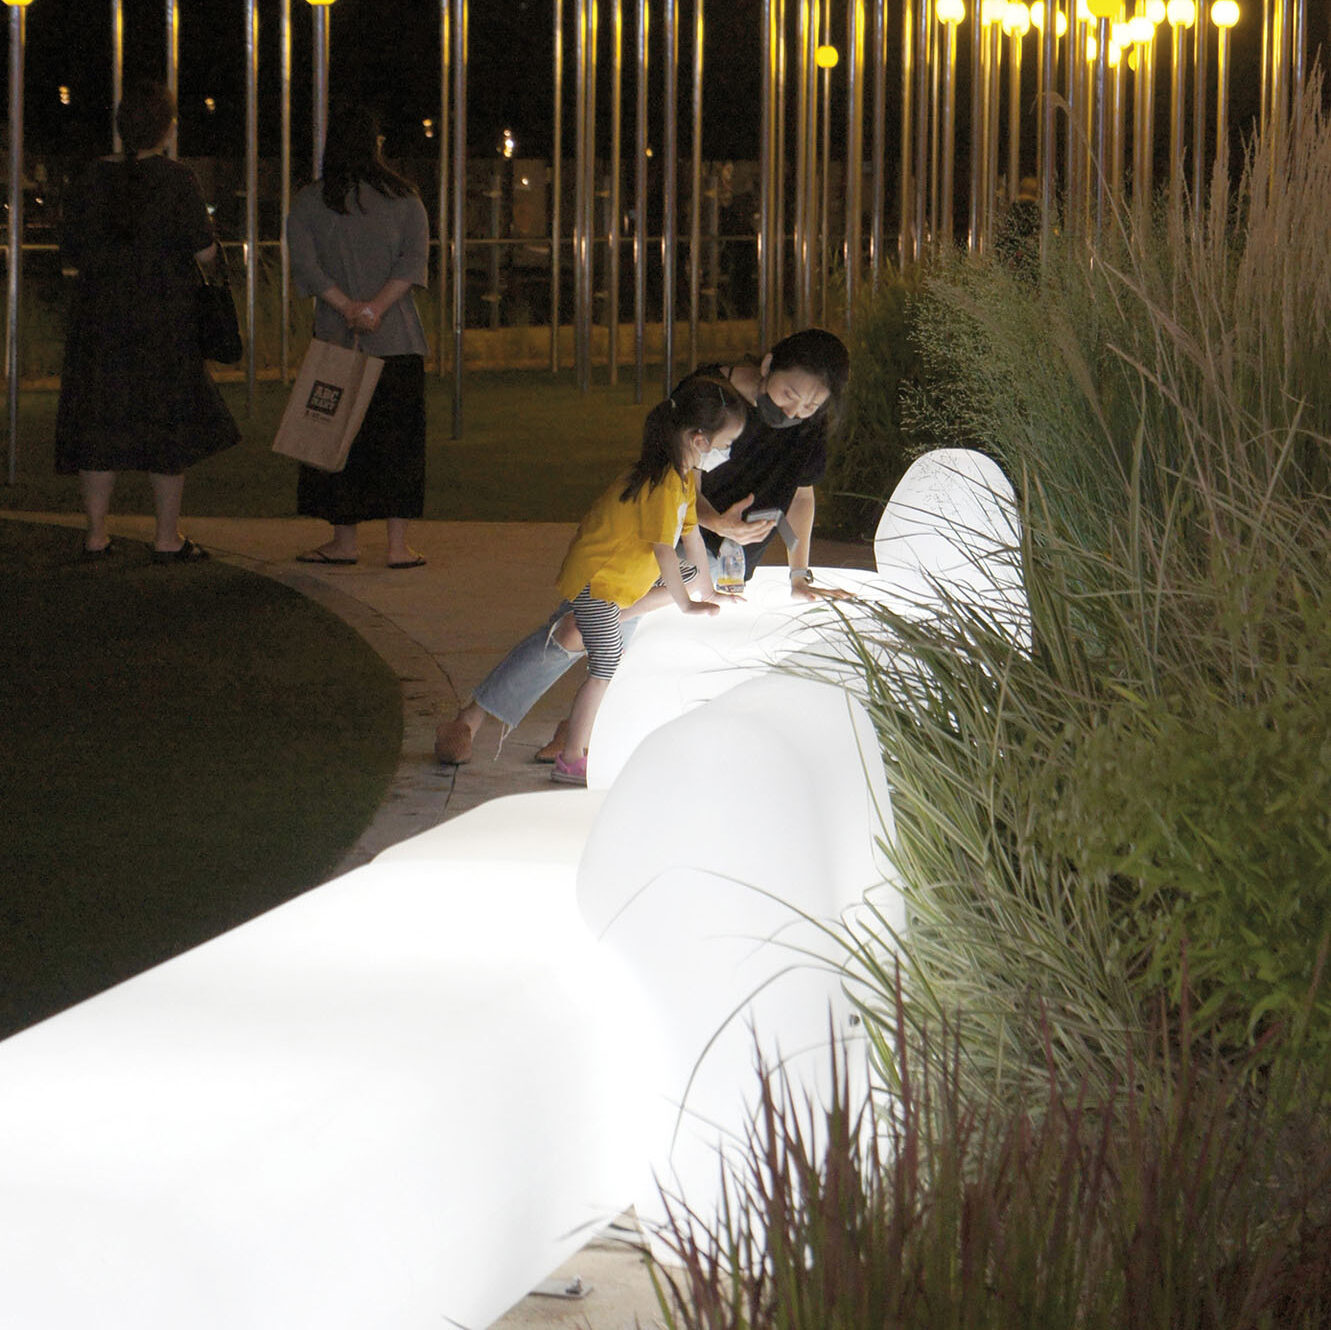 An image of two people engaging with an illuminated plastic bench